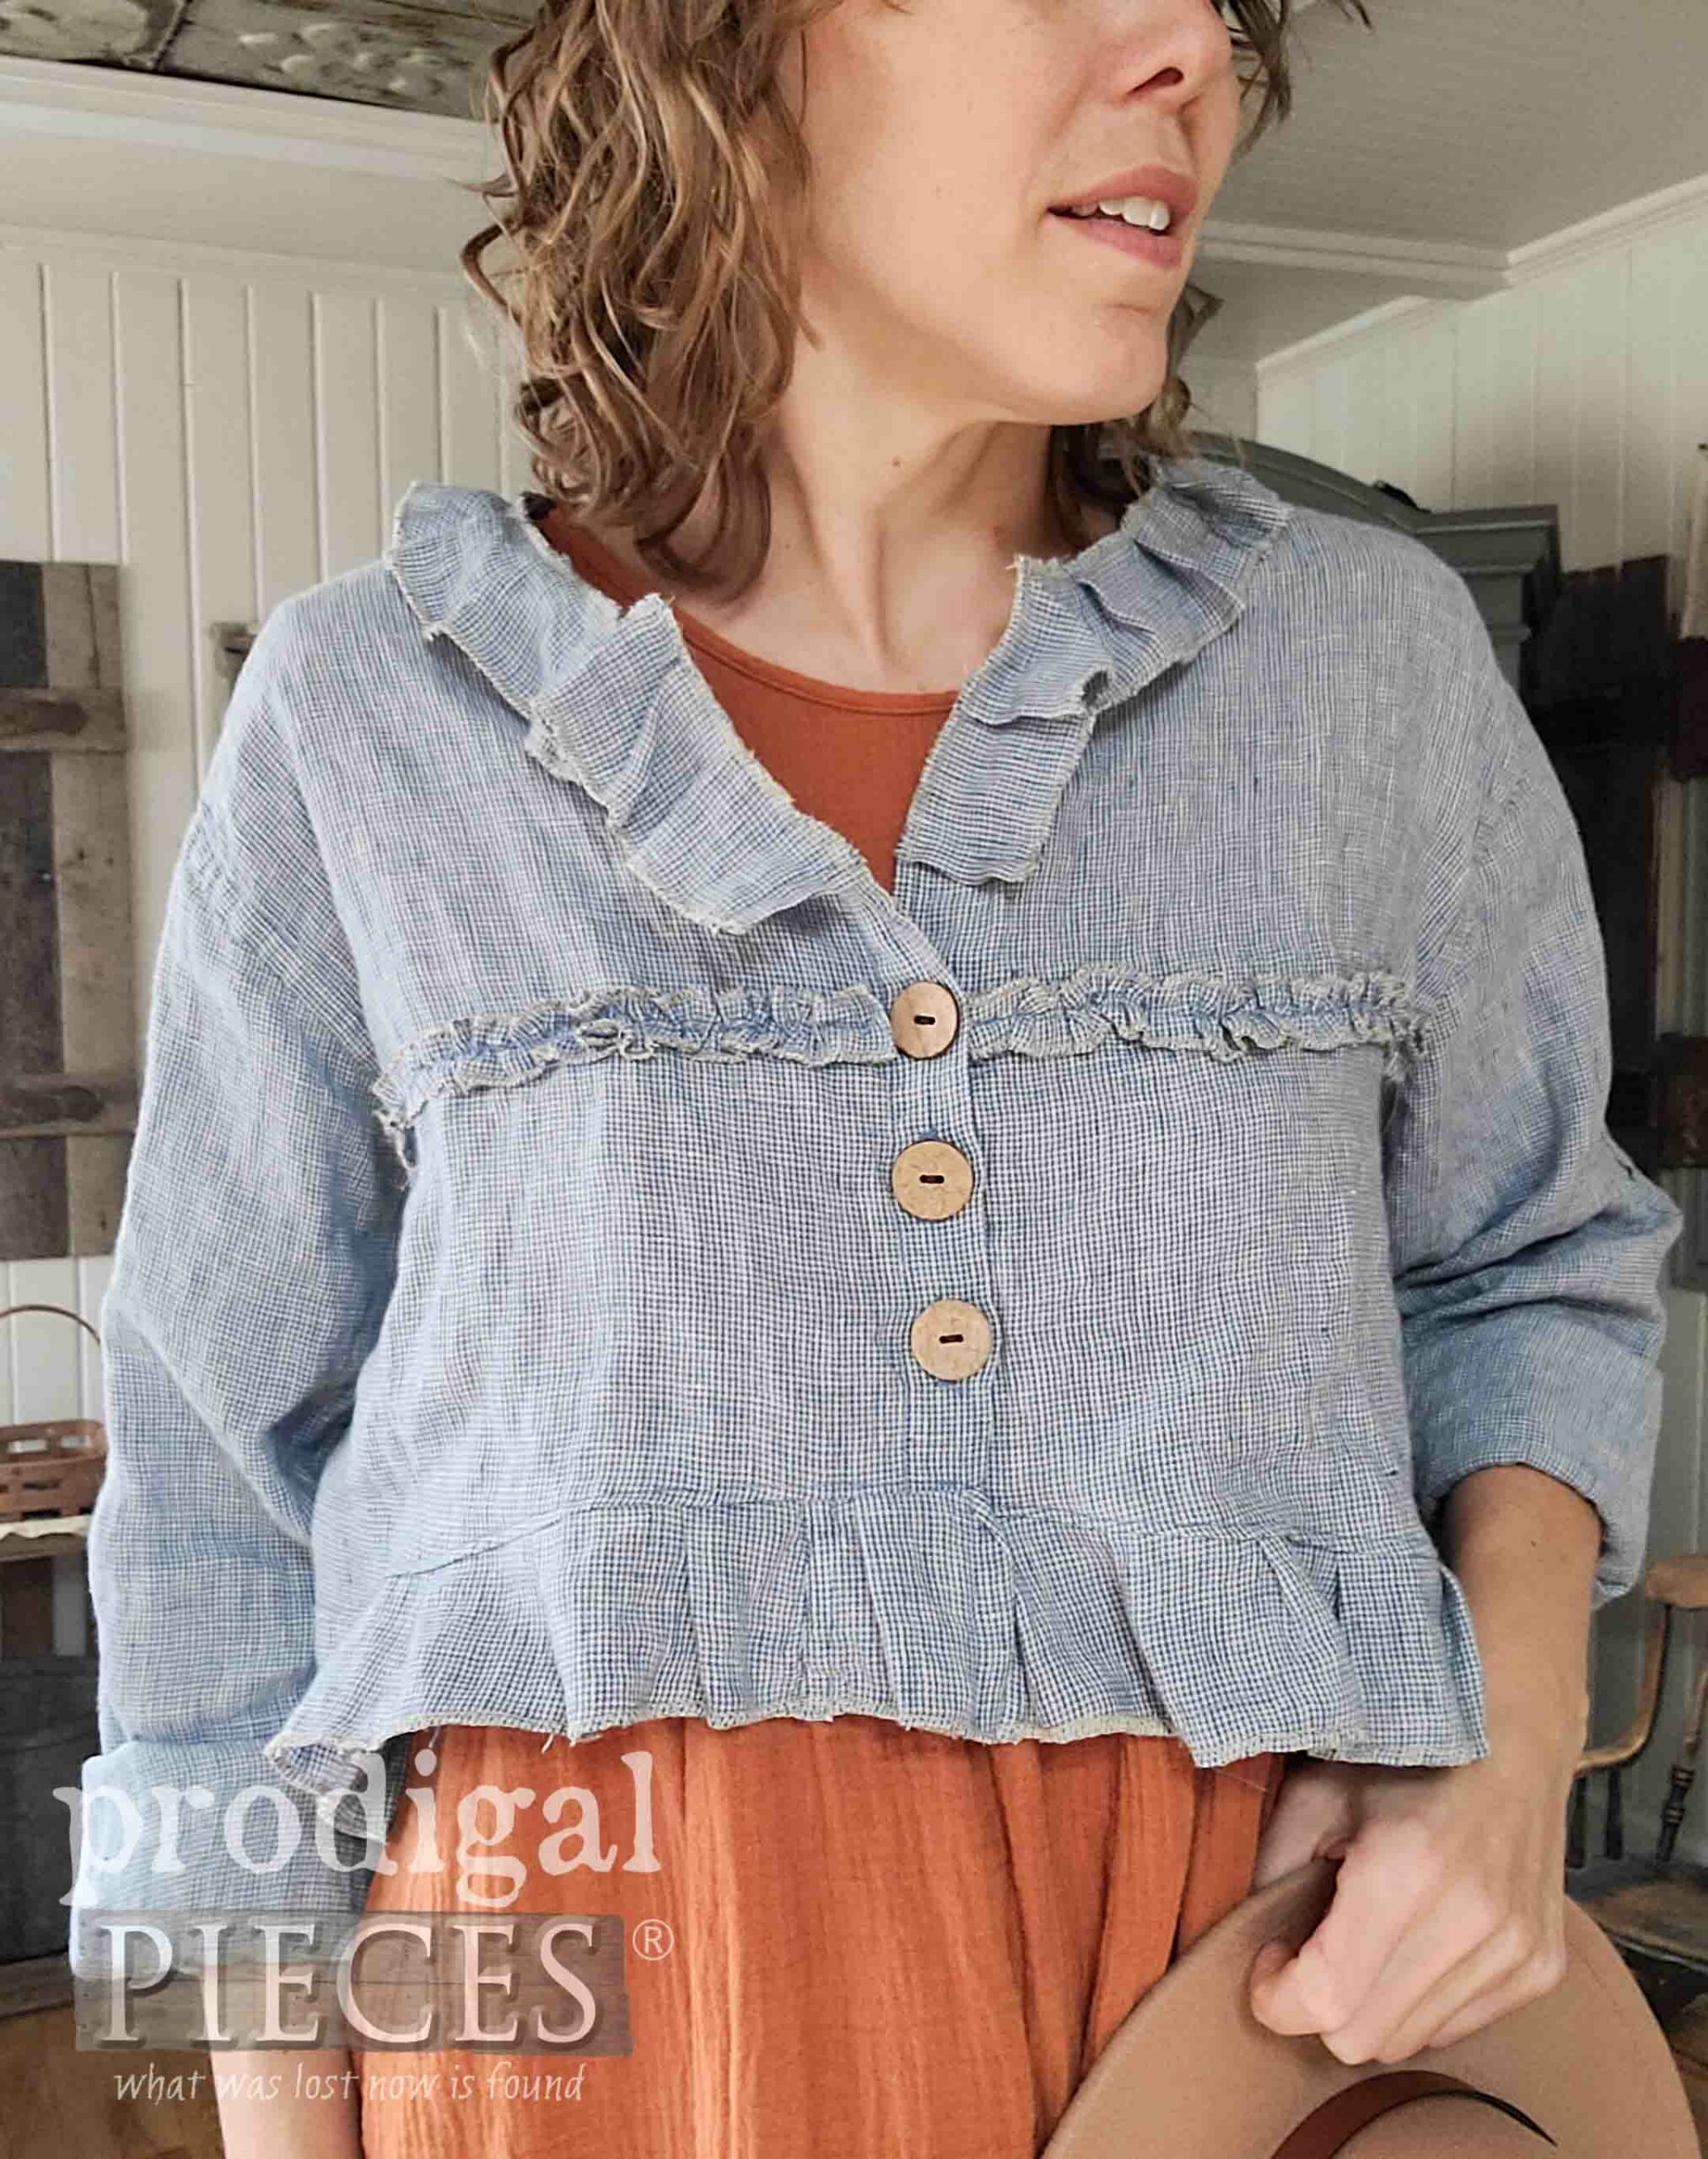 DIY Linen Sock Jacket from Refashioned Thrifted Shirt by Larissa of Prodigal Pieces | prodigalpieces.com #prodigalpieces #style #fashion #sewing